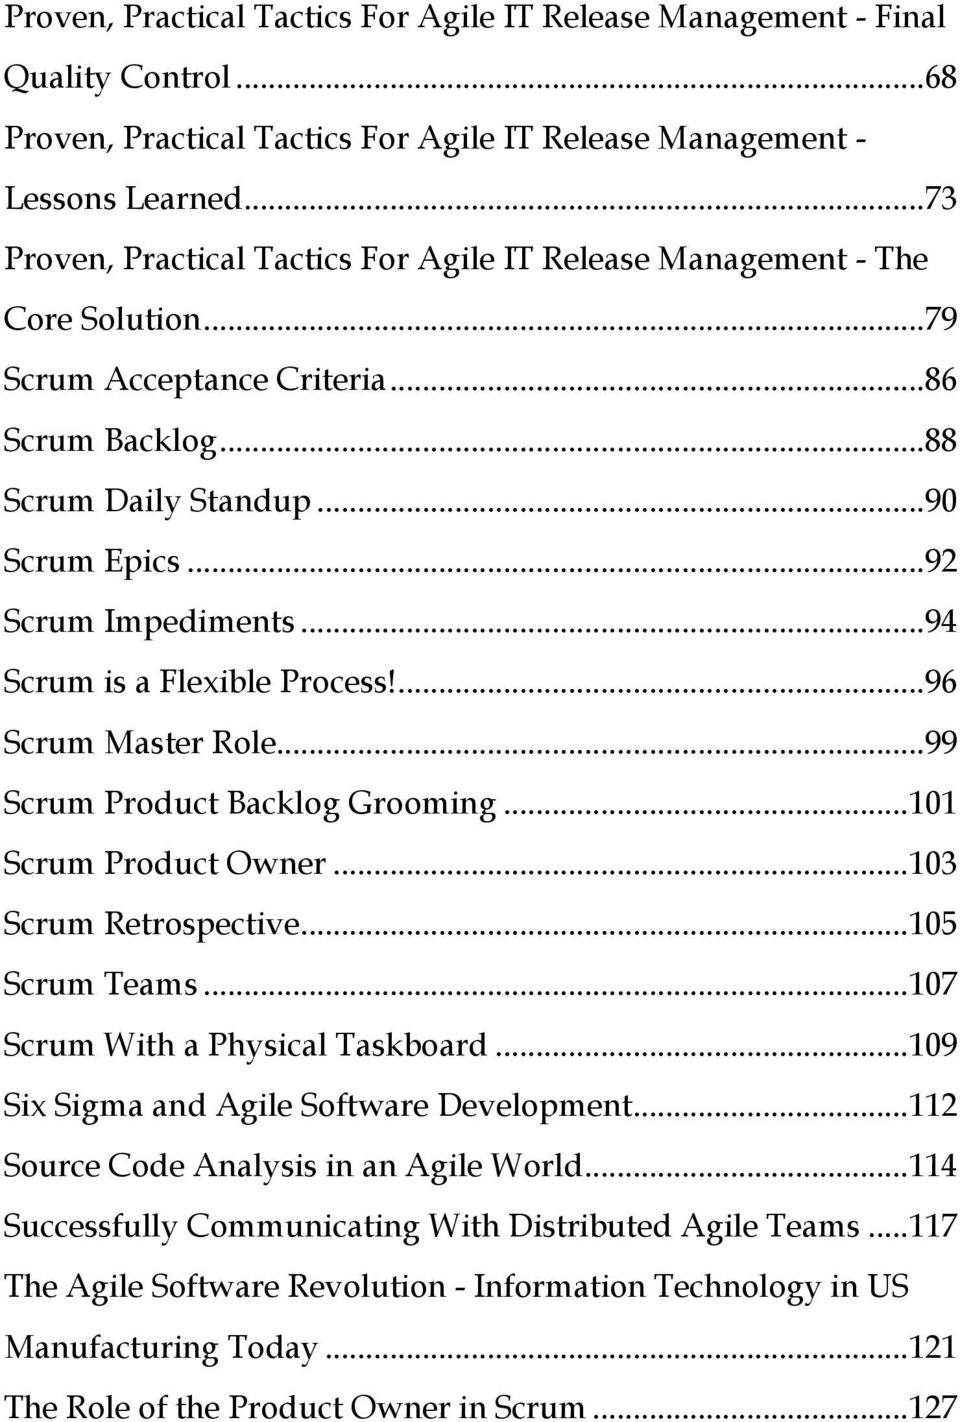 .. 92 Scrum Impediments... 94 Scrum is a Flexible Process!... 96 Scrum Master Role... 99 Scrum Product Backlog Grooming... 101 Scrum Product Owner... 103 Scrum Retrospective... 105 Scrum Teams.